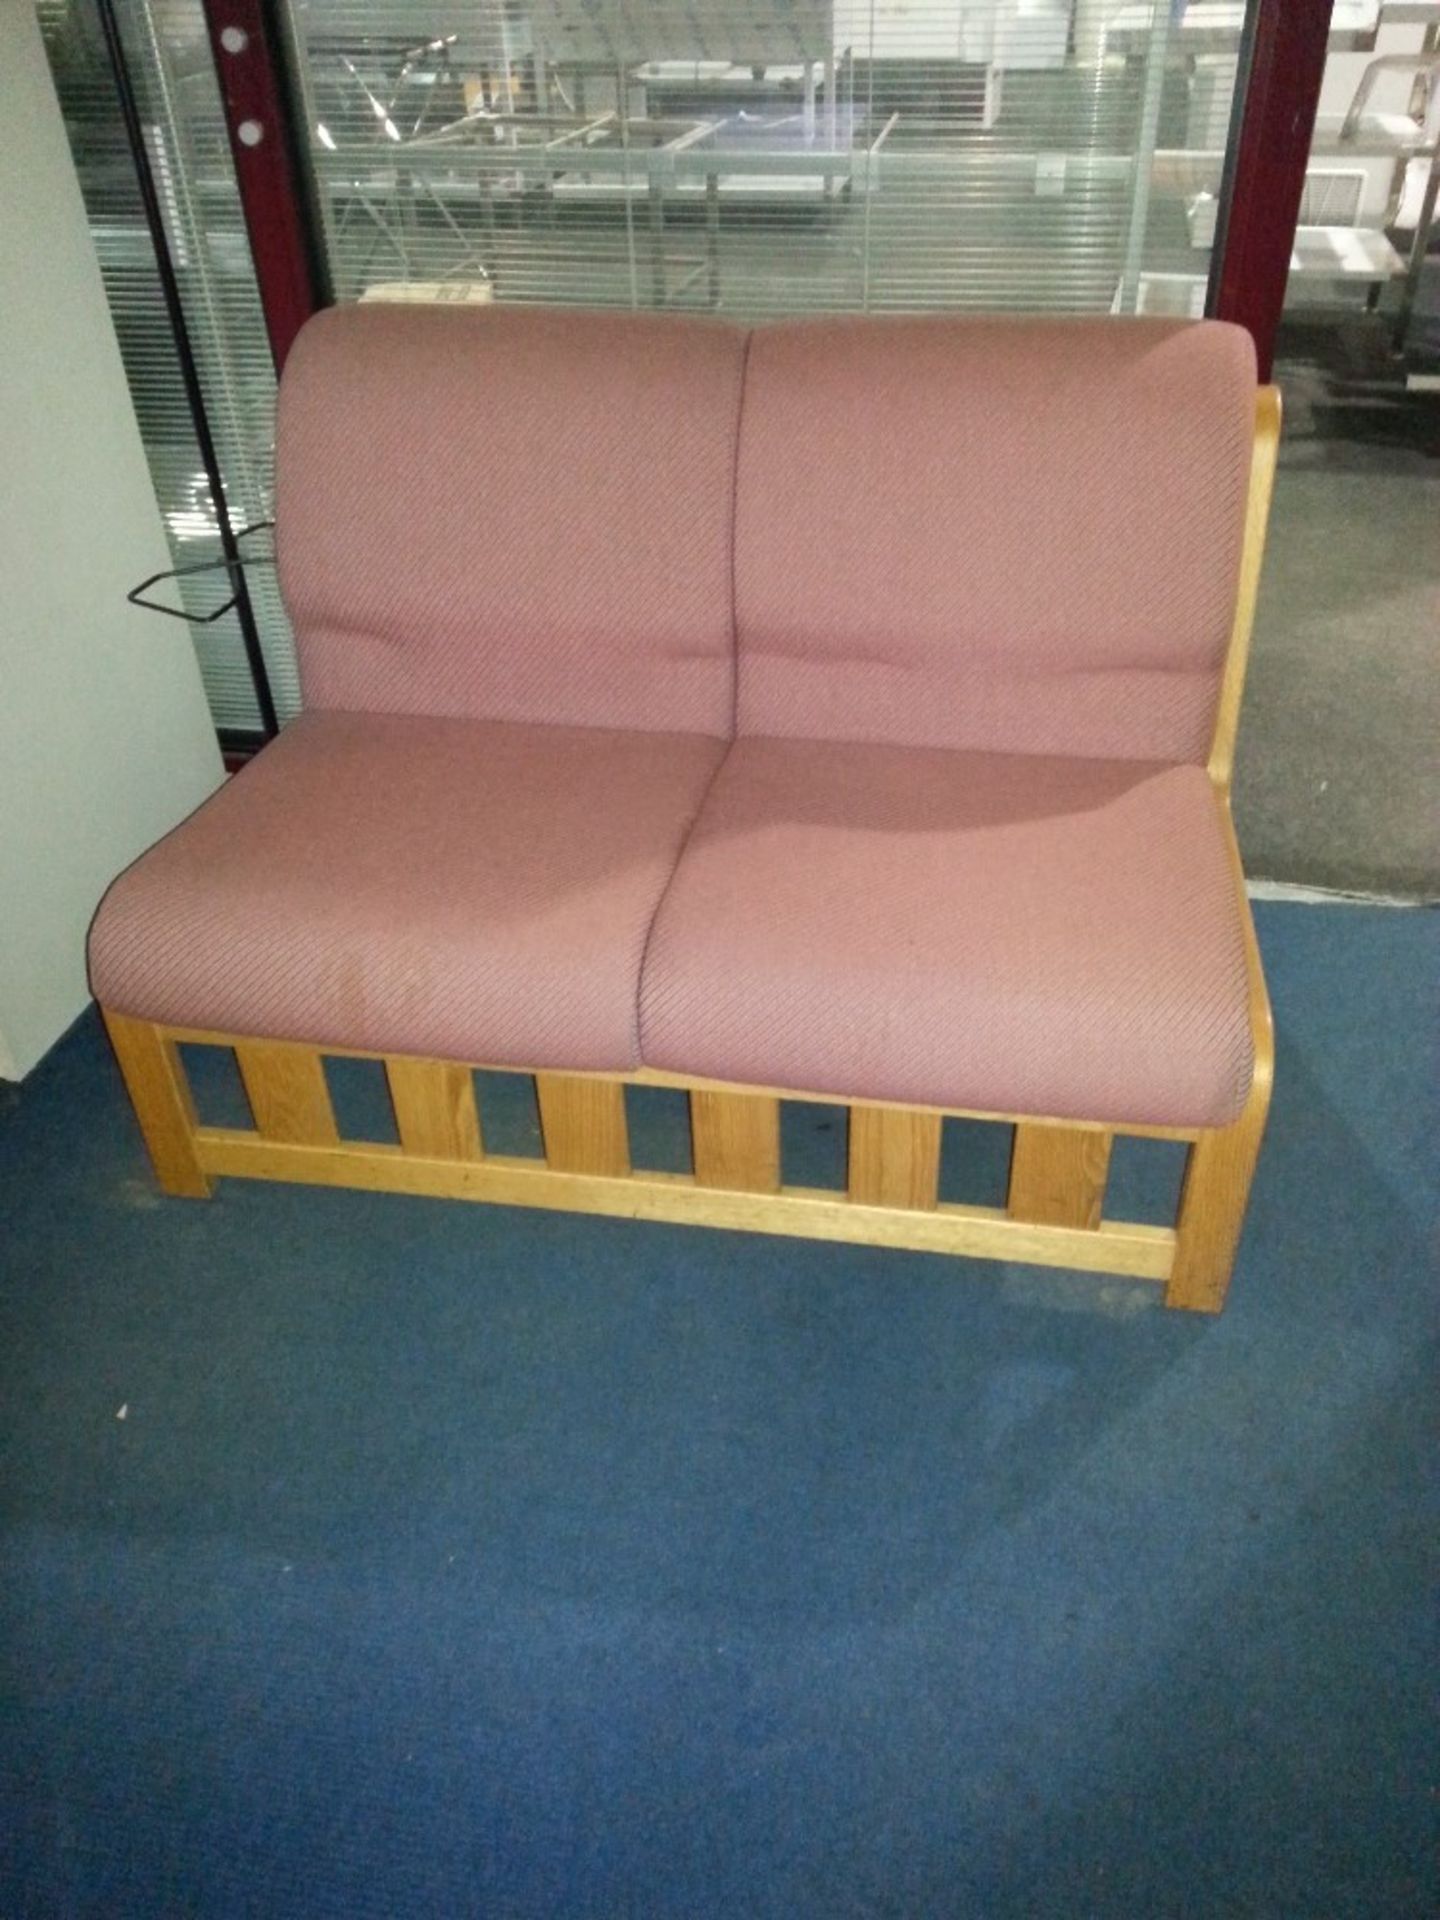 2 seater reception seat Located in Gateshead Tyne and Wear collection Friday 24th till Monday 27th